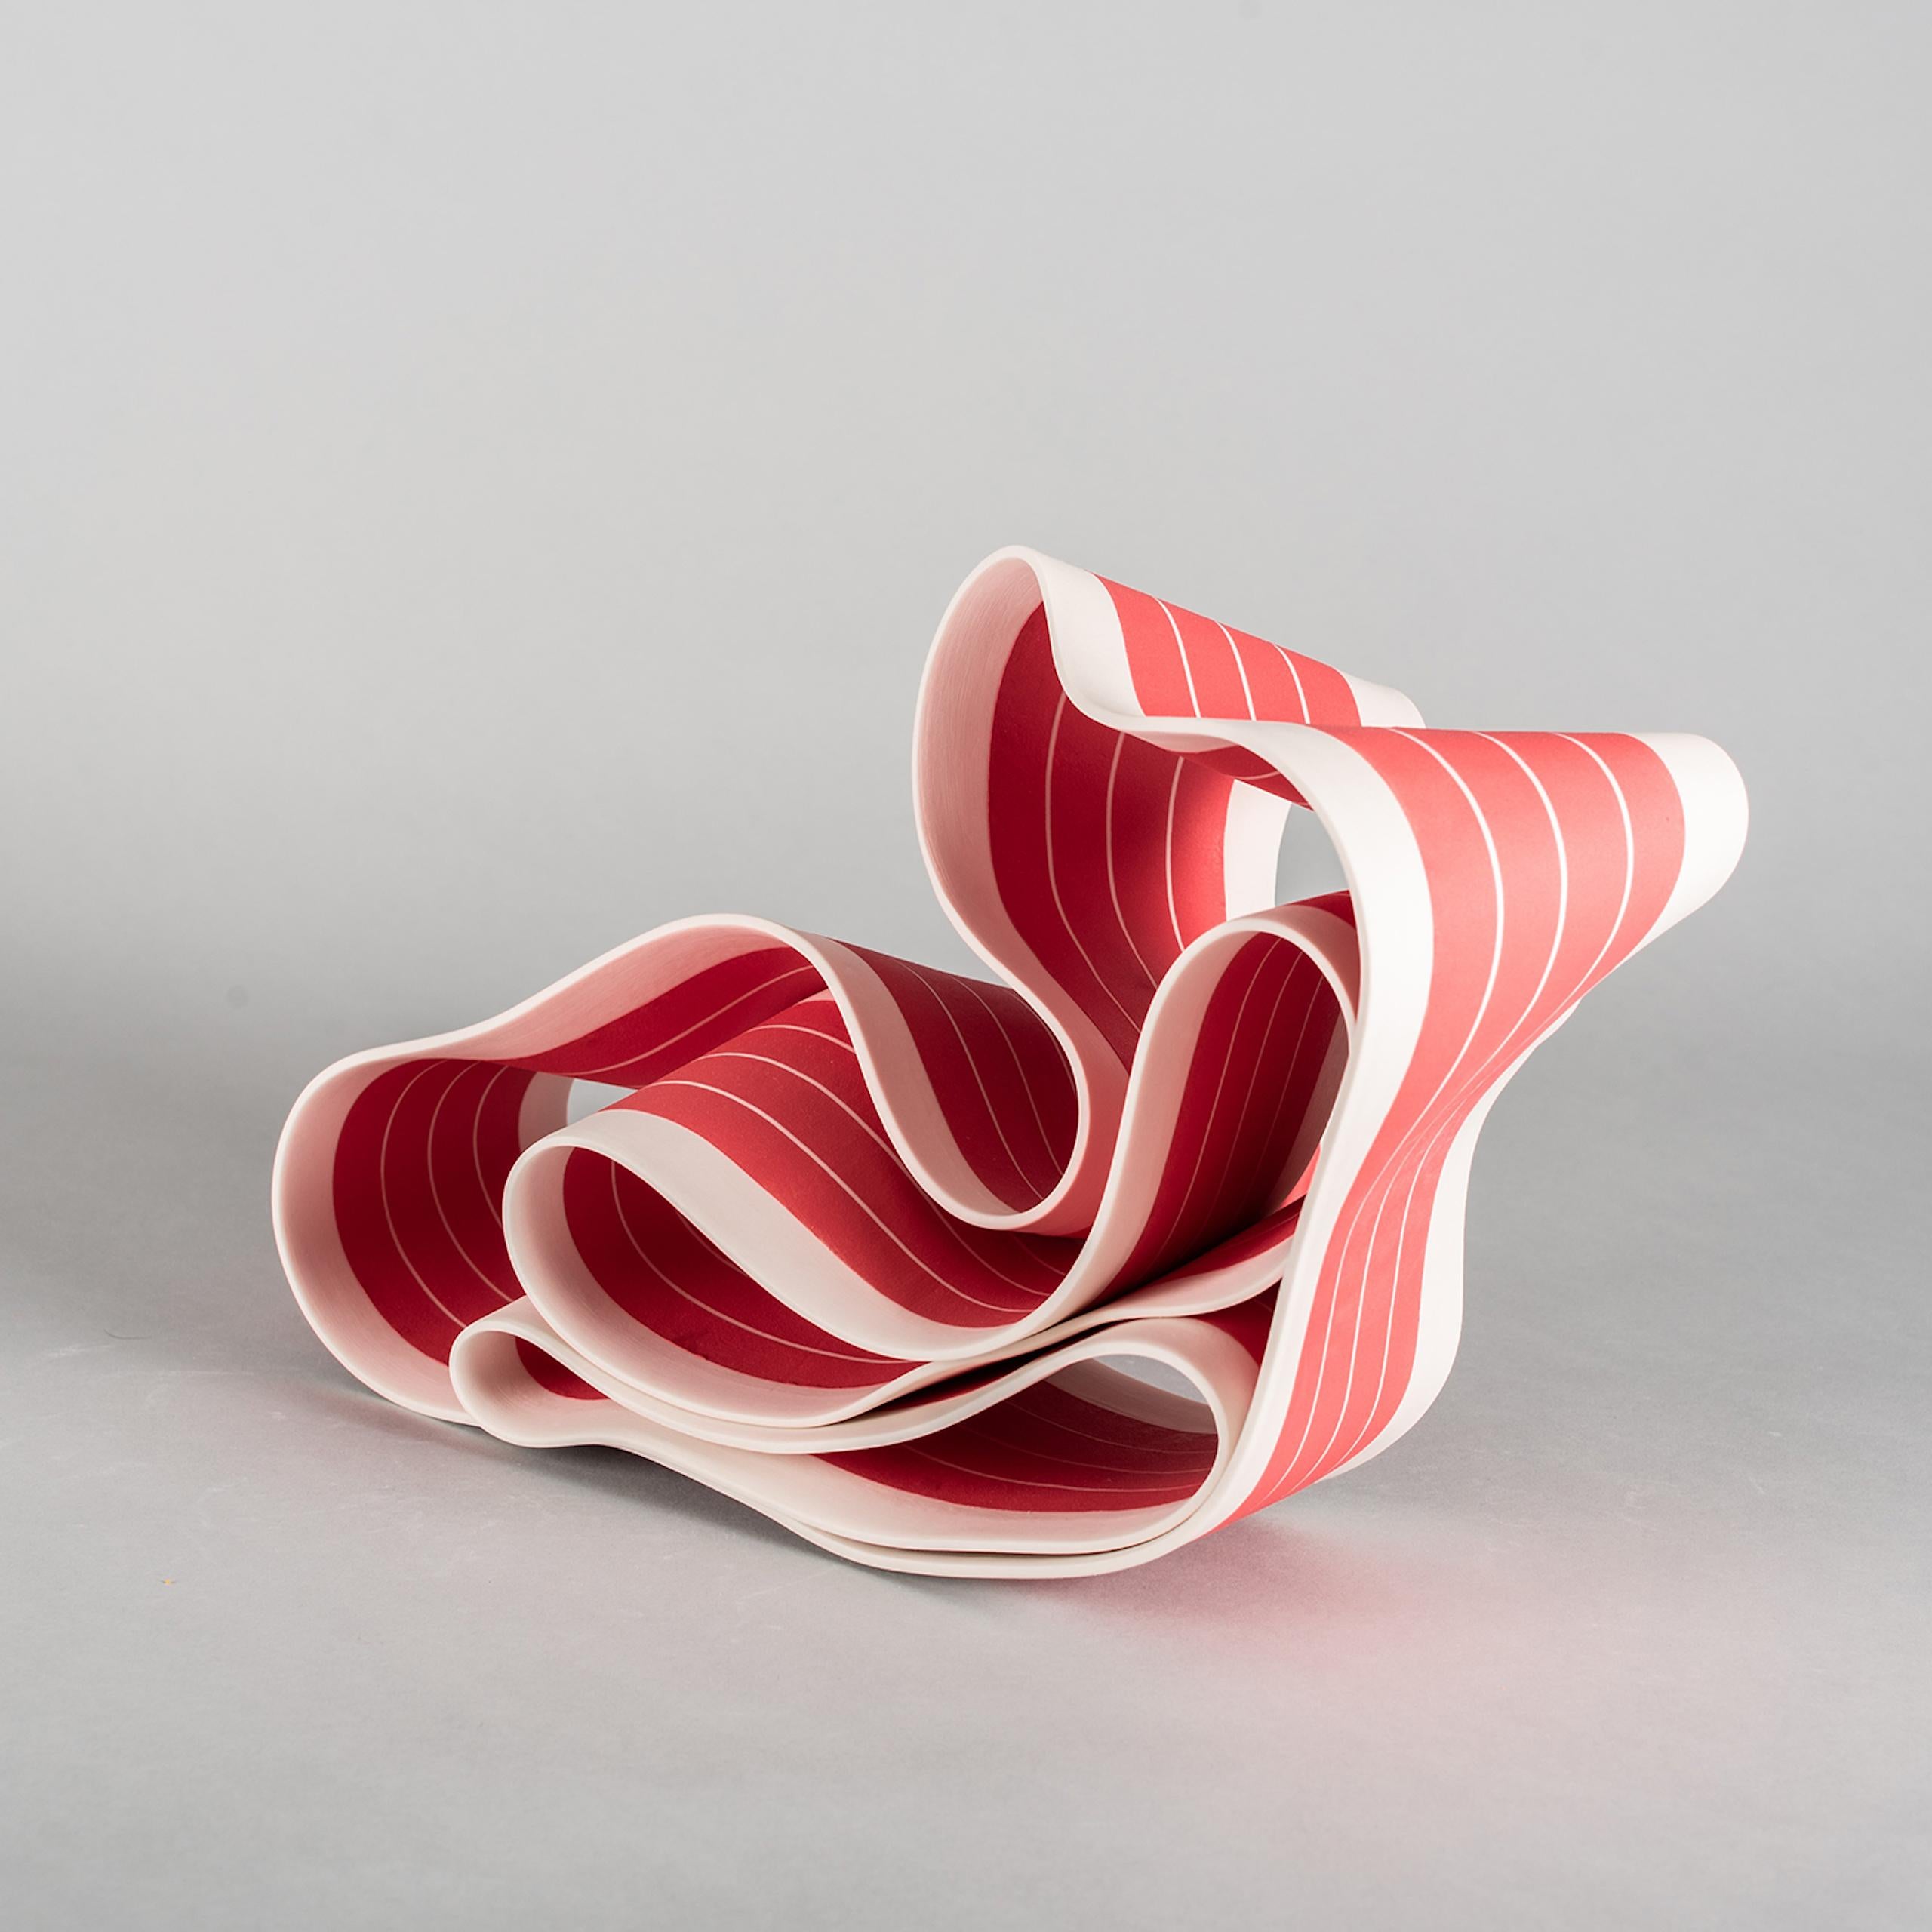 Folding in Motion 3 by Simcha Even-Chen - porcelain sculpture, red For Sale 2